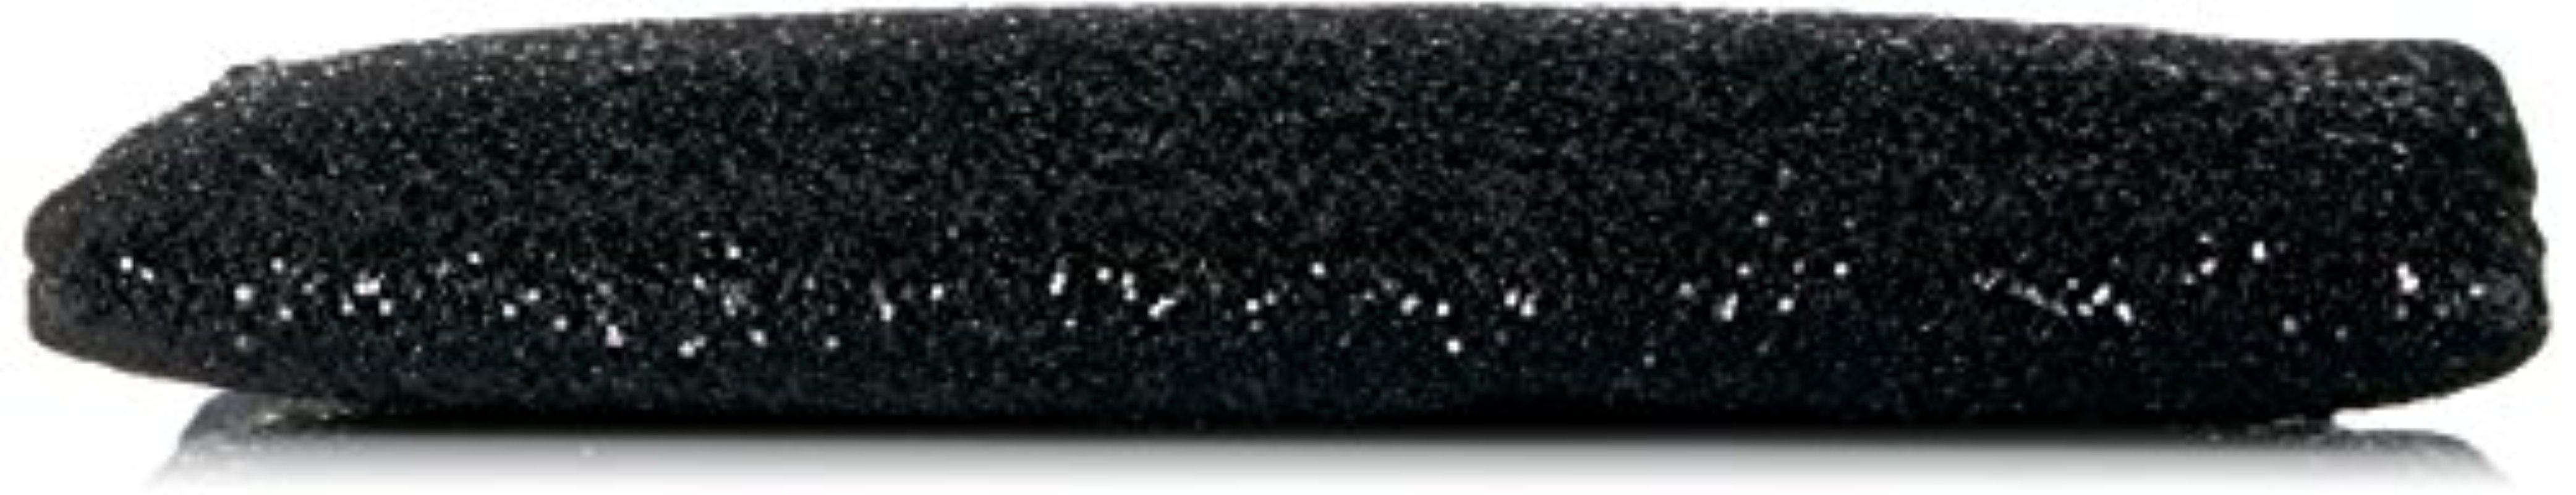 Guess Ever After Glitter Crossbody Clutch in Black - Lyst